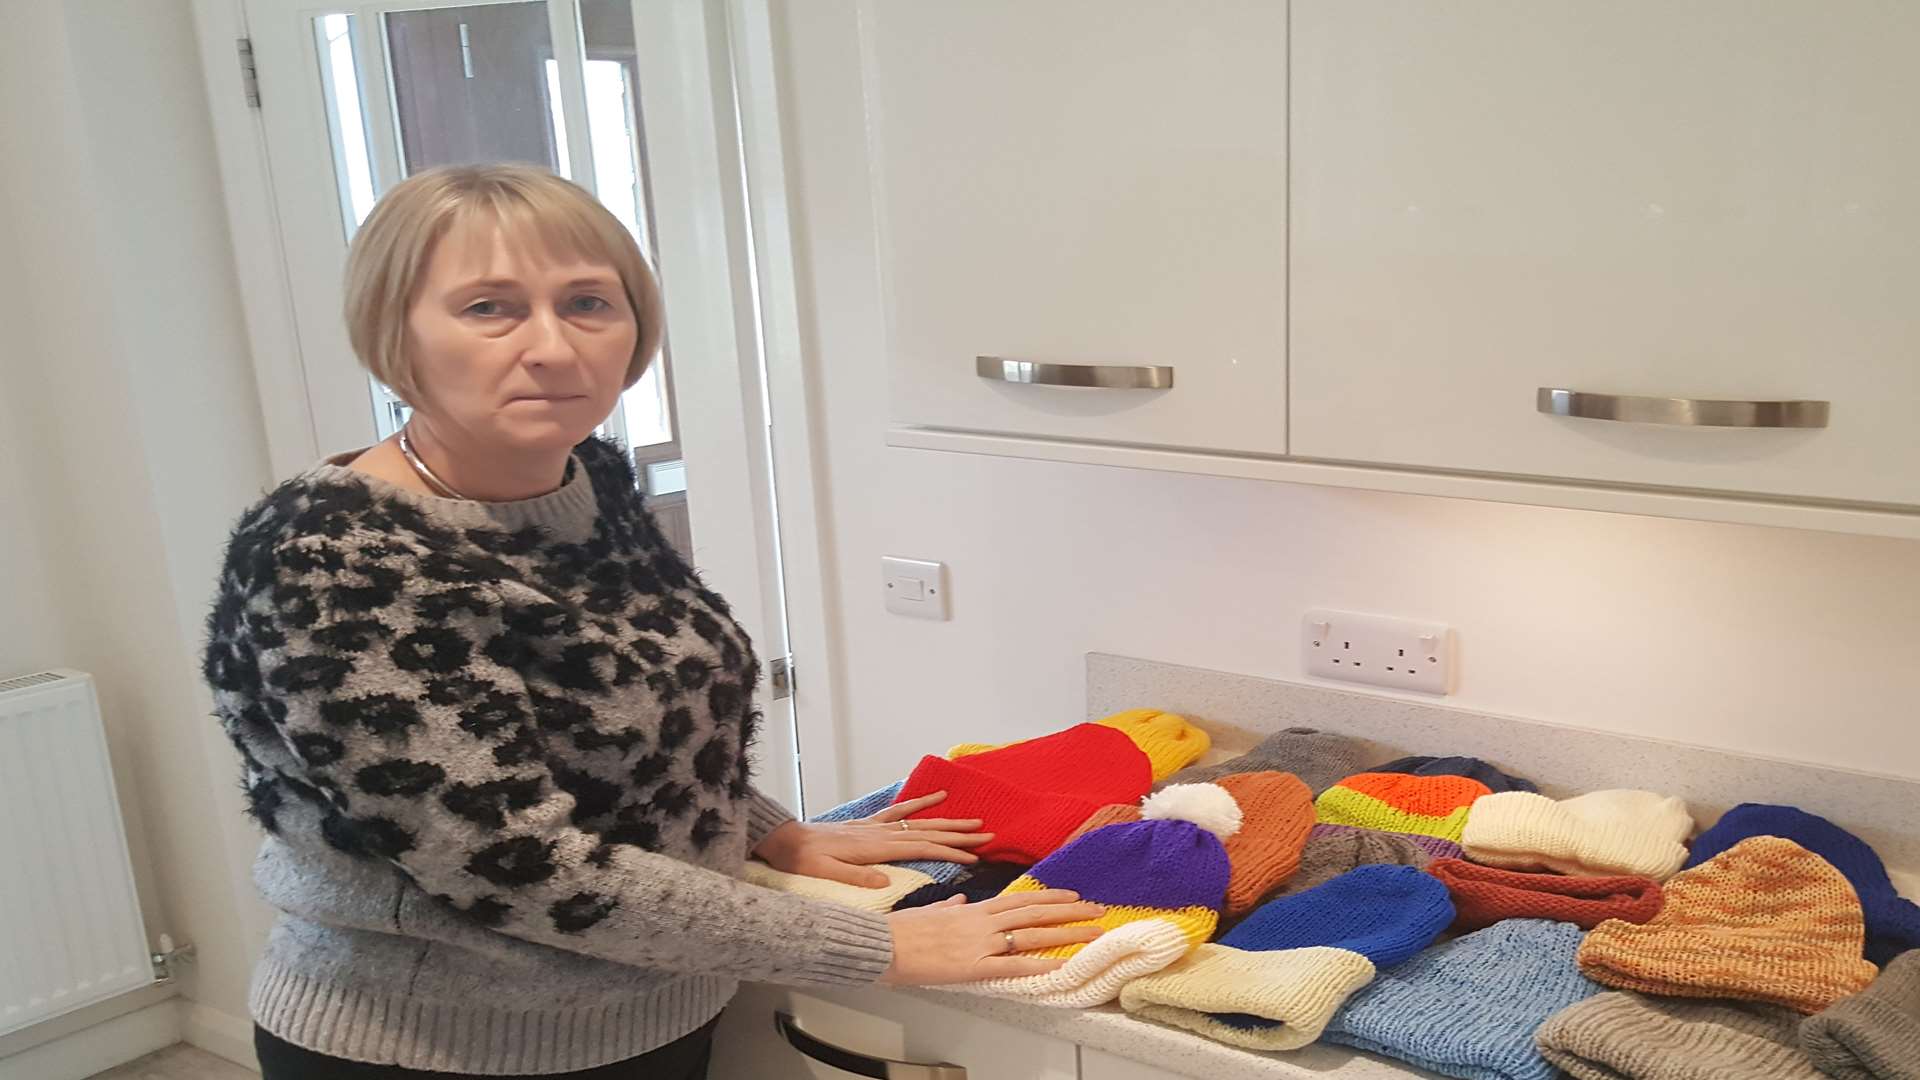 Amanda Evans and her knitted hats, which she donates to the homeless